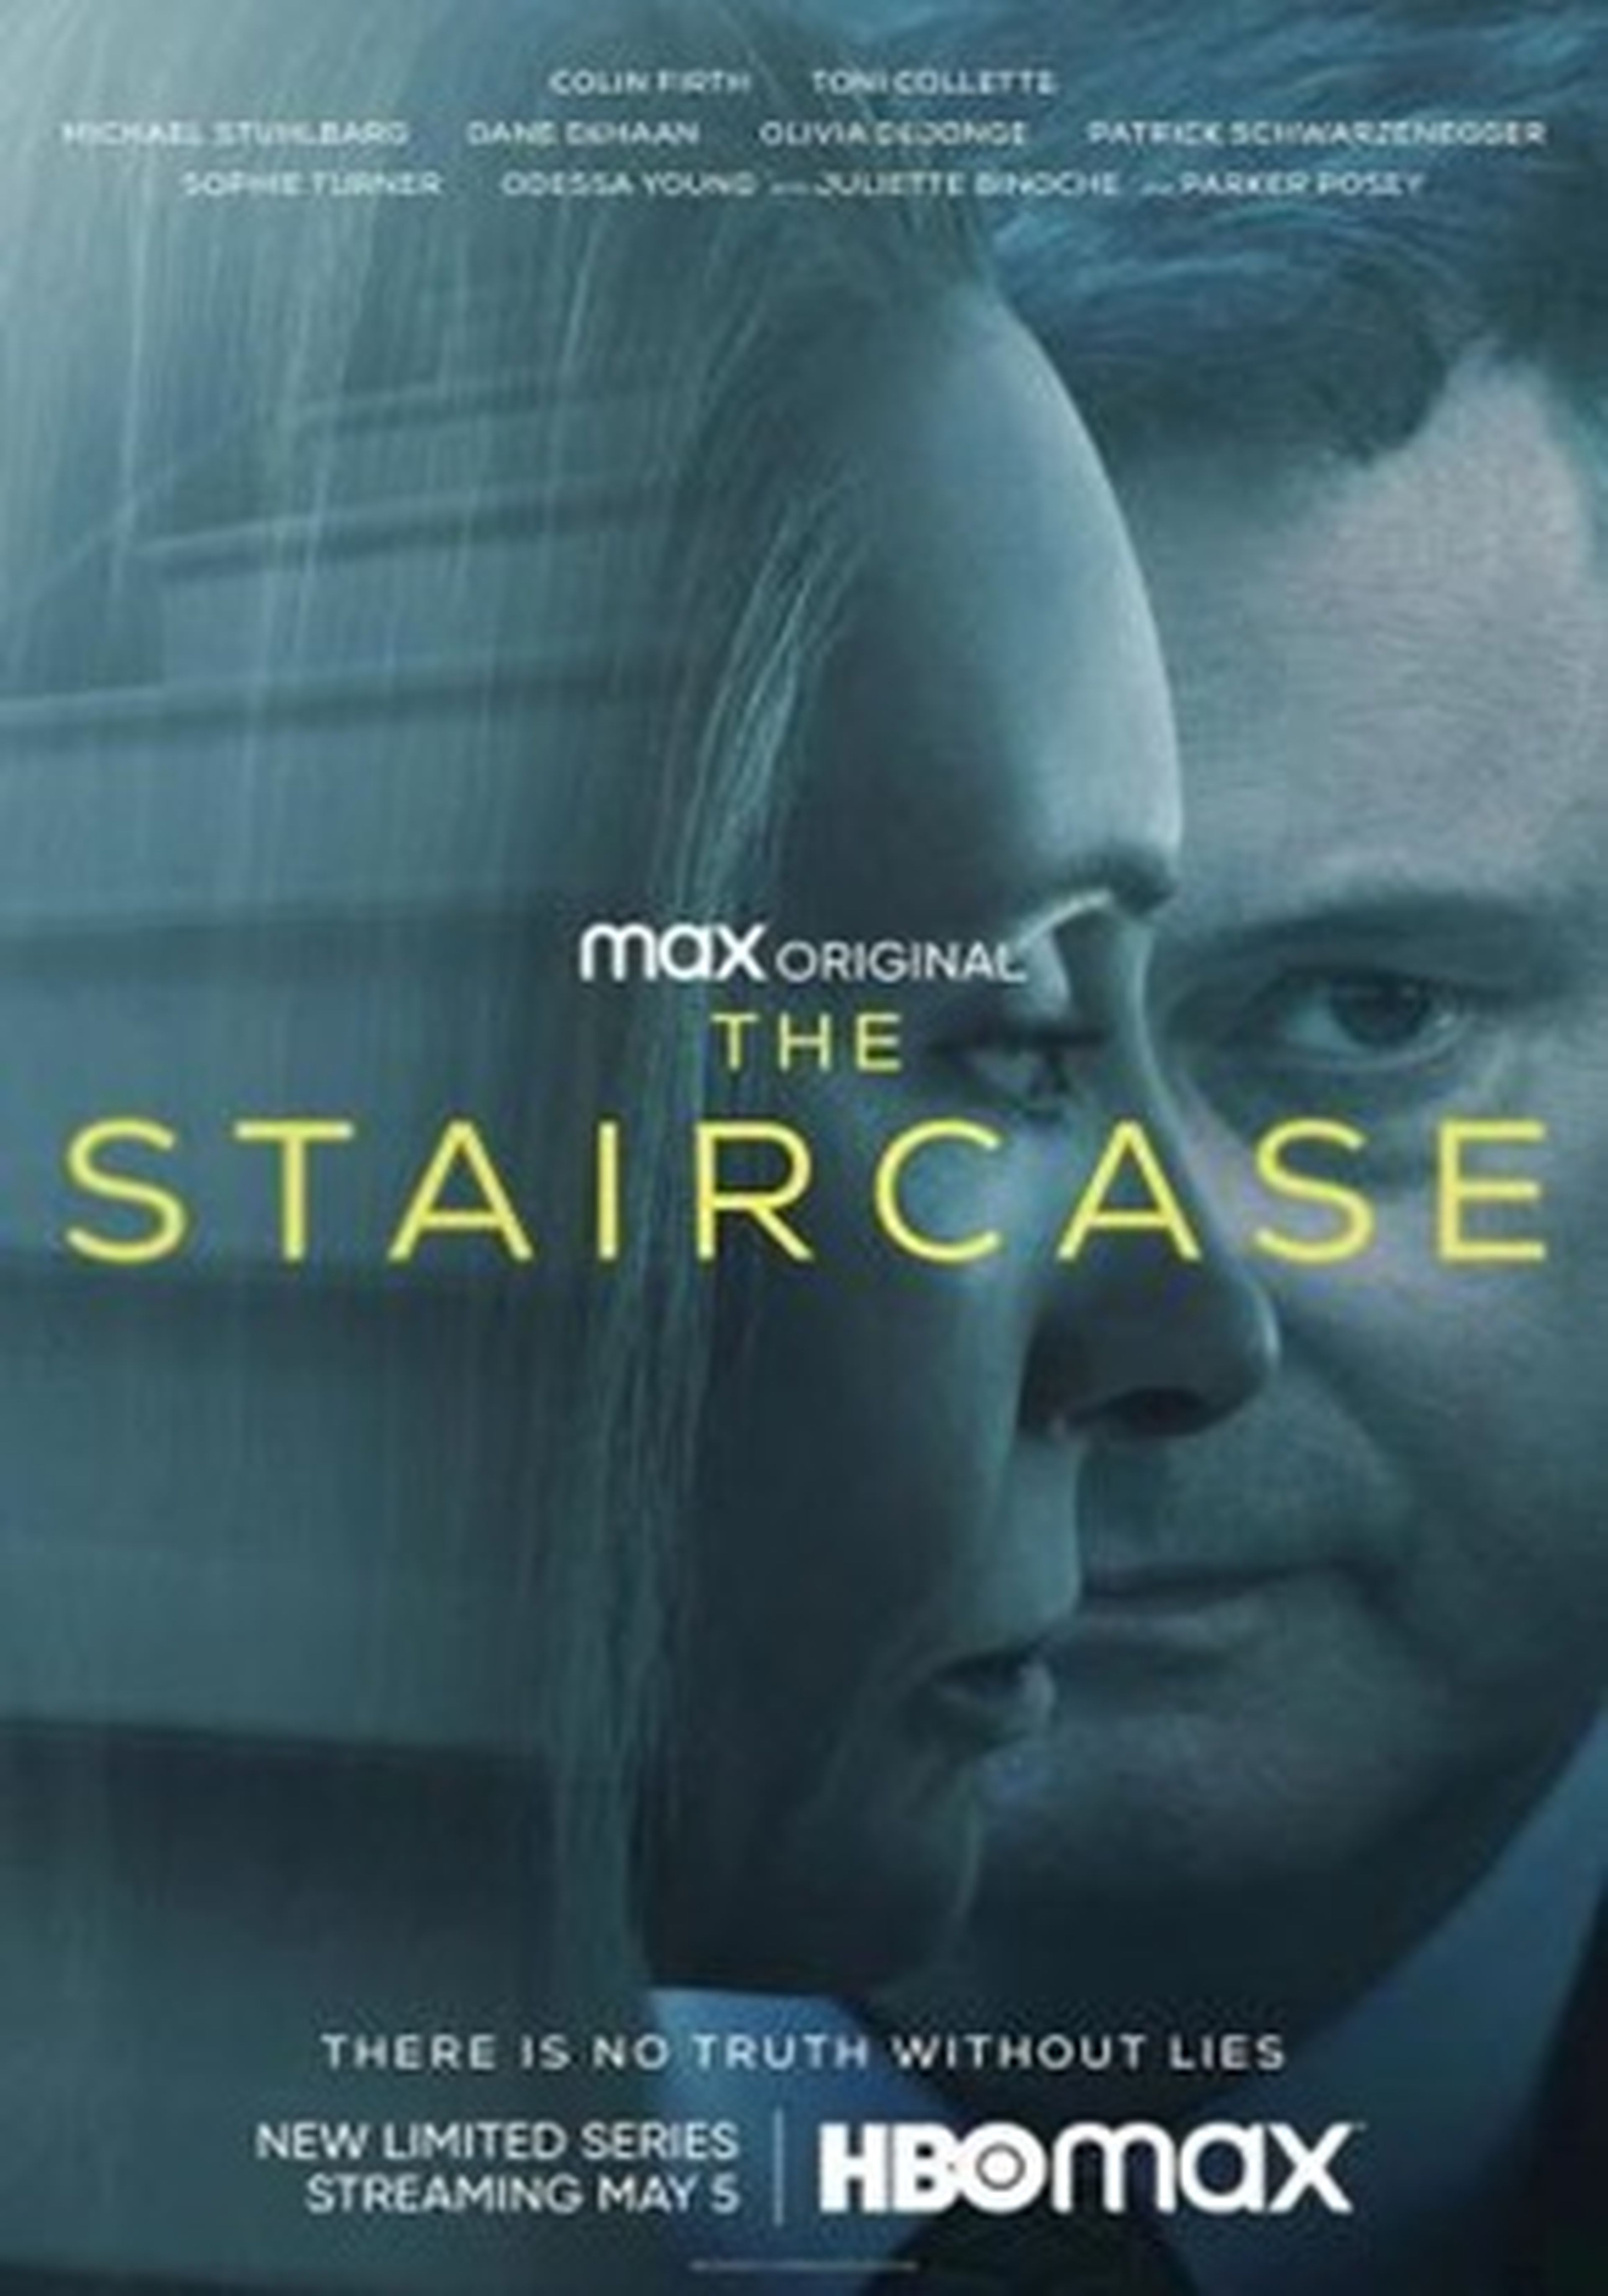 The Staircase cartel